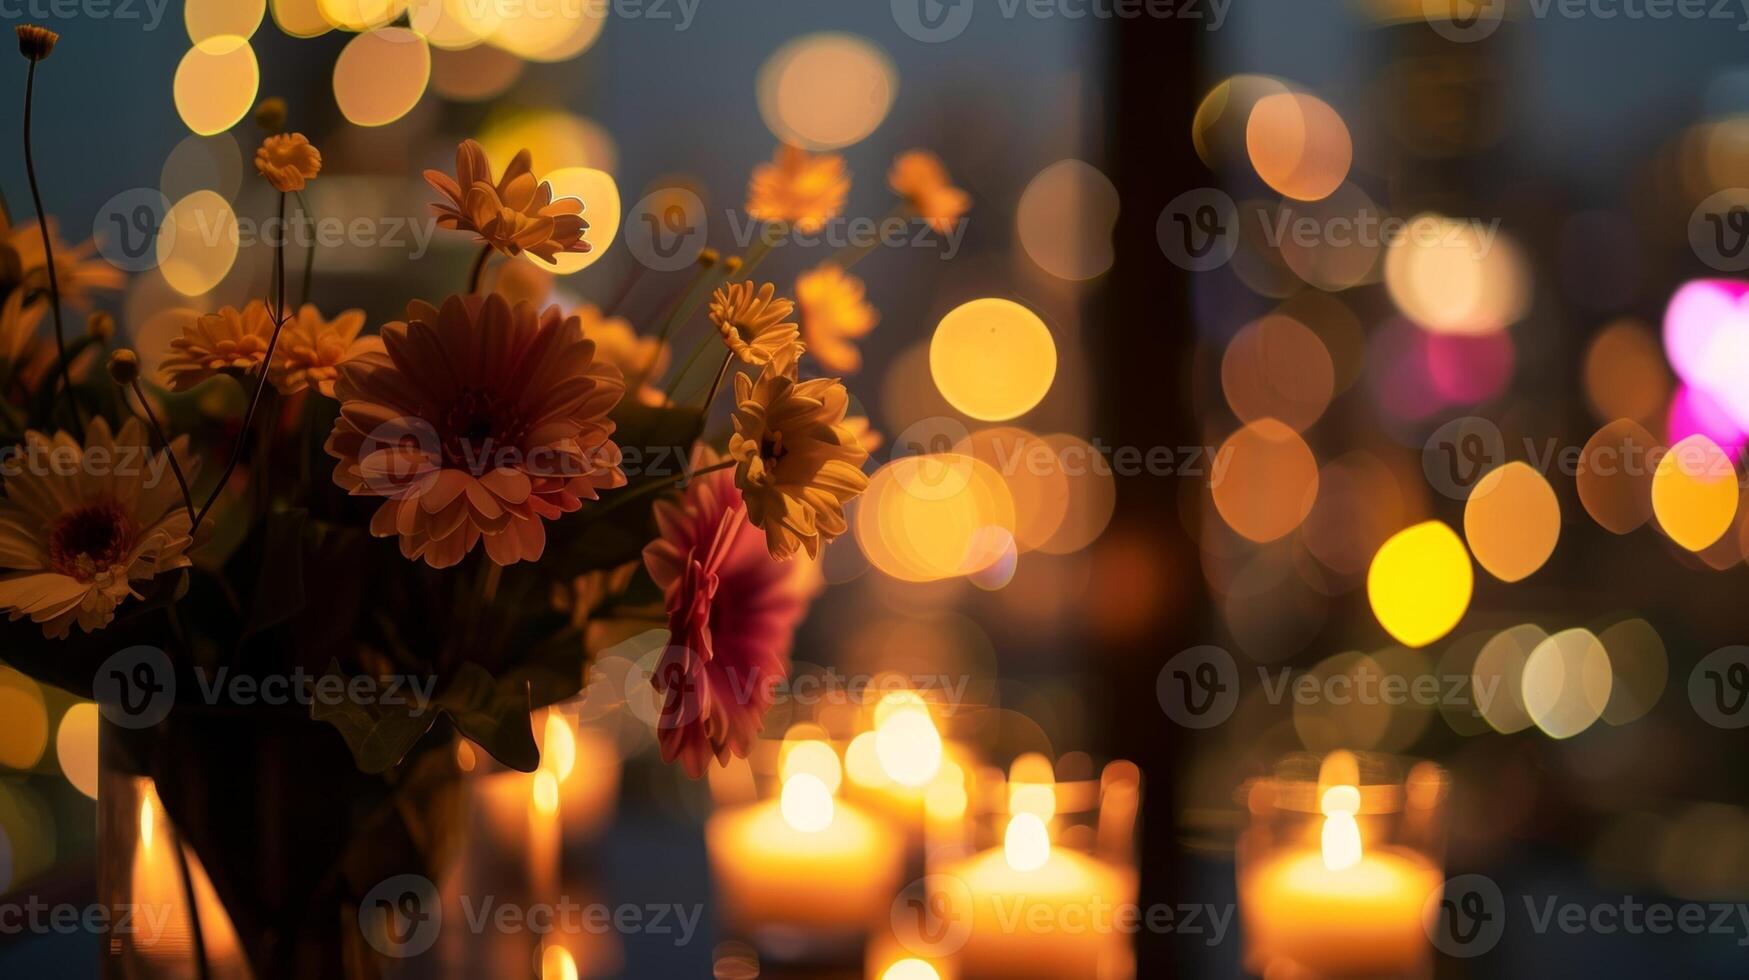 With the city skyline as a backdrop the candlelit atmosphere creates a cozy and intimate setting for the flower arranging class. 2d flat cartoon photo